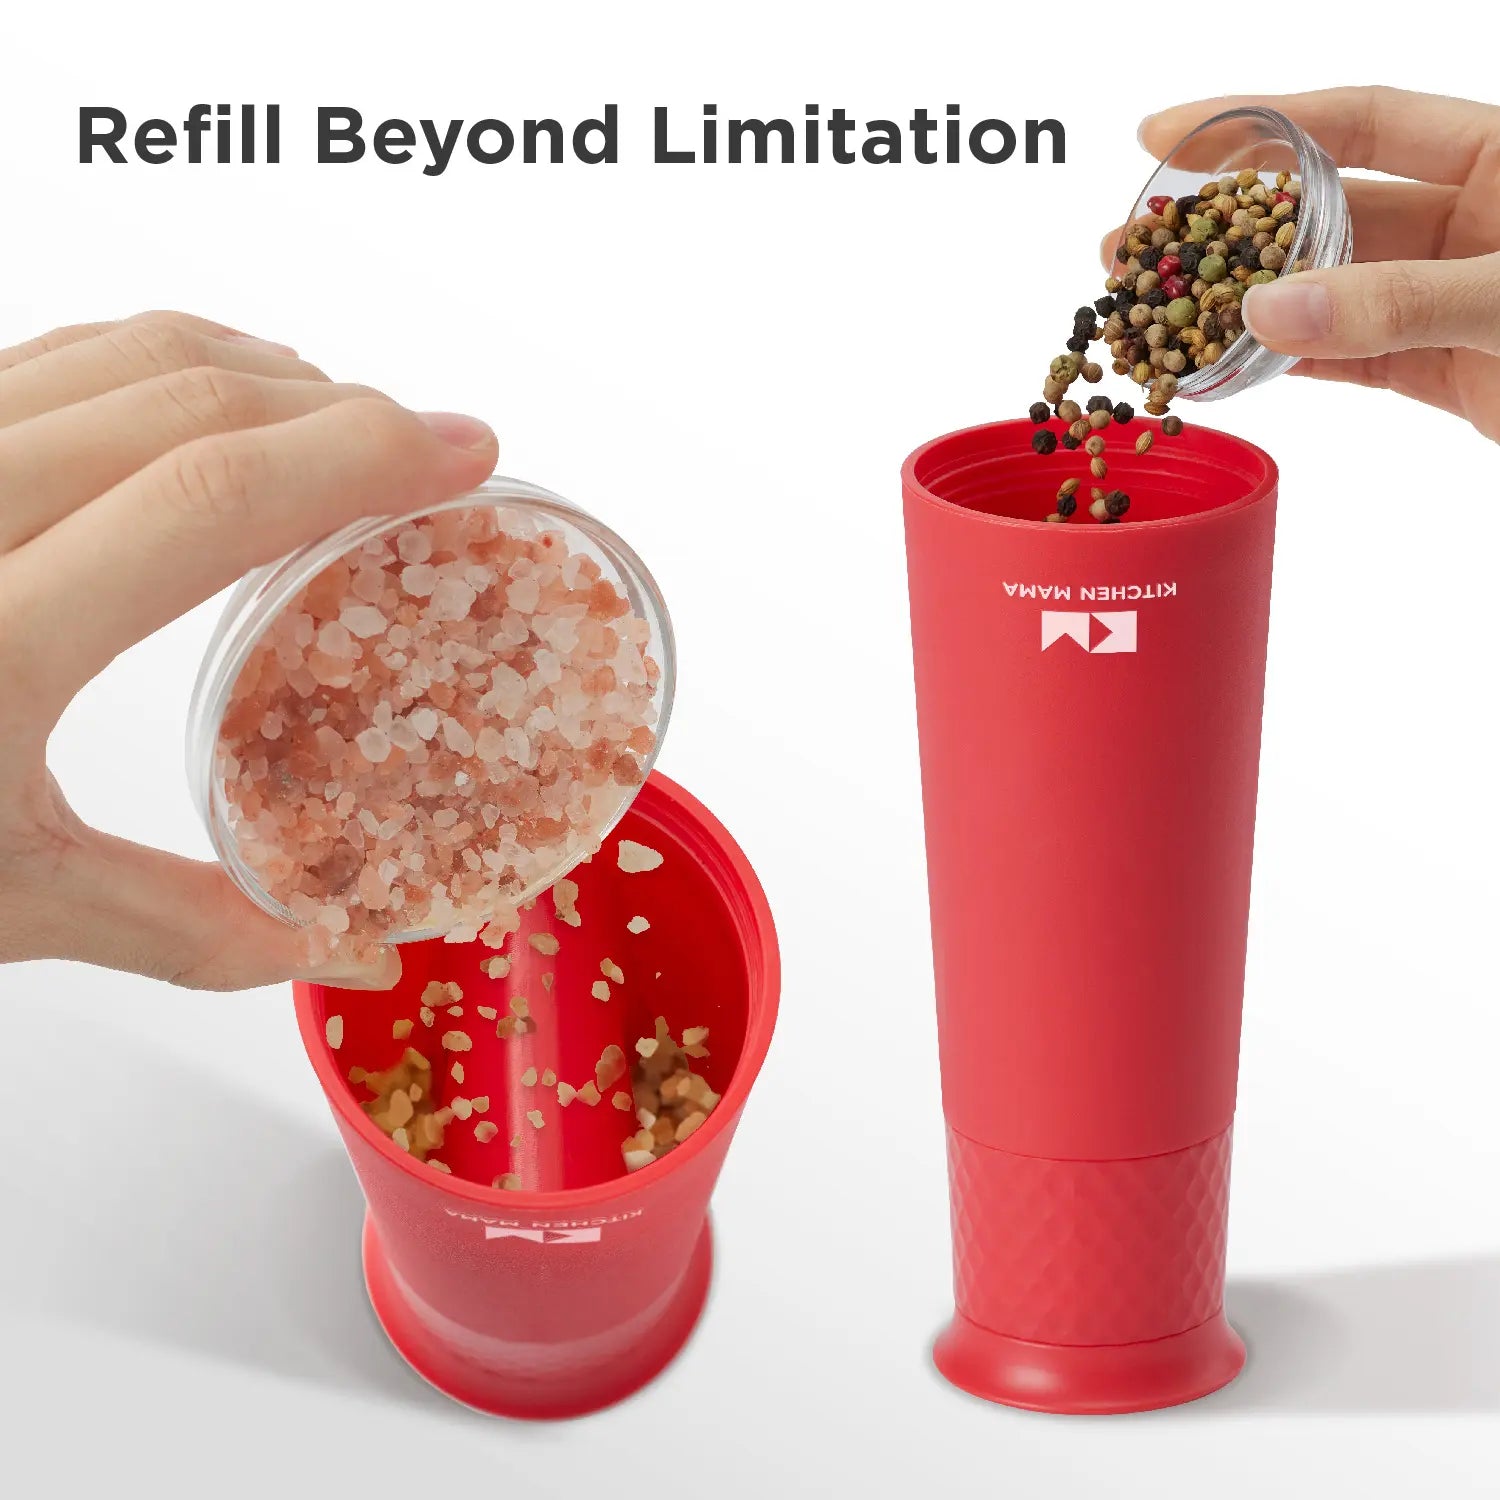 FlipTastic Rechargeable Gravity Grinder, GM3000-R, Kitchen Mama, Refill beyond limitation